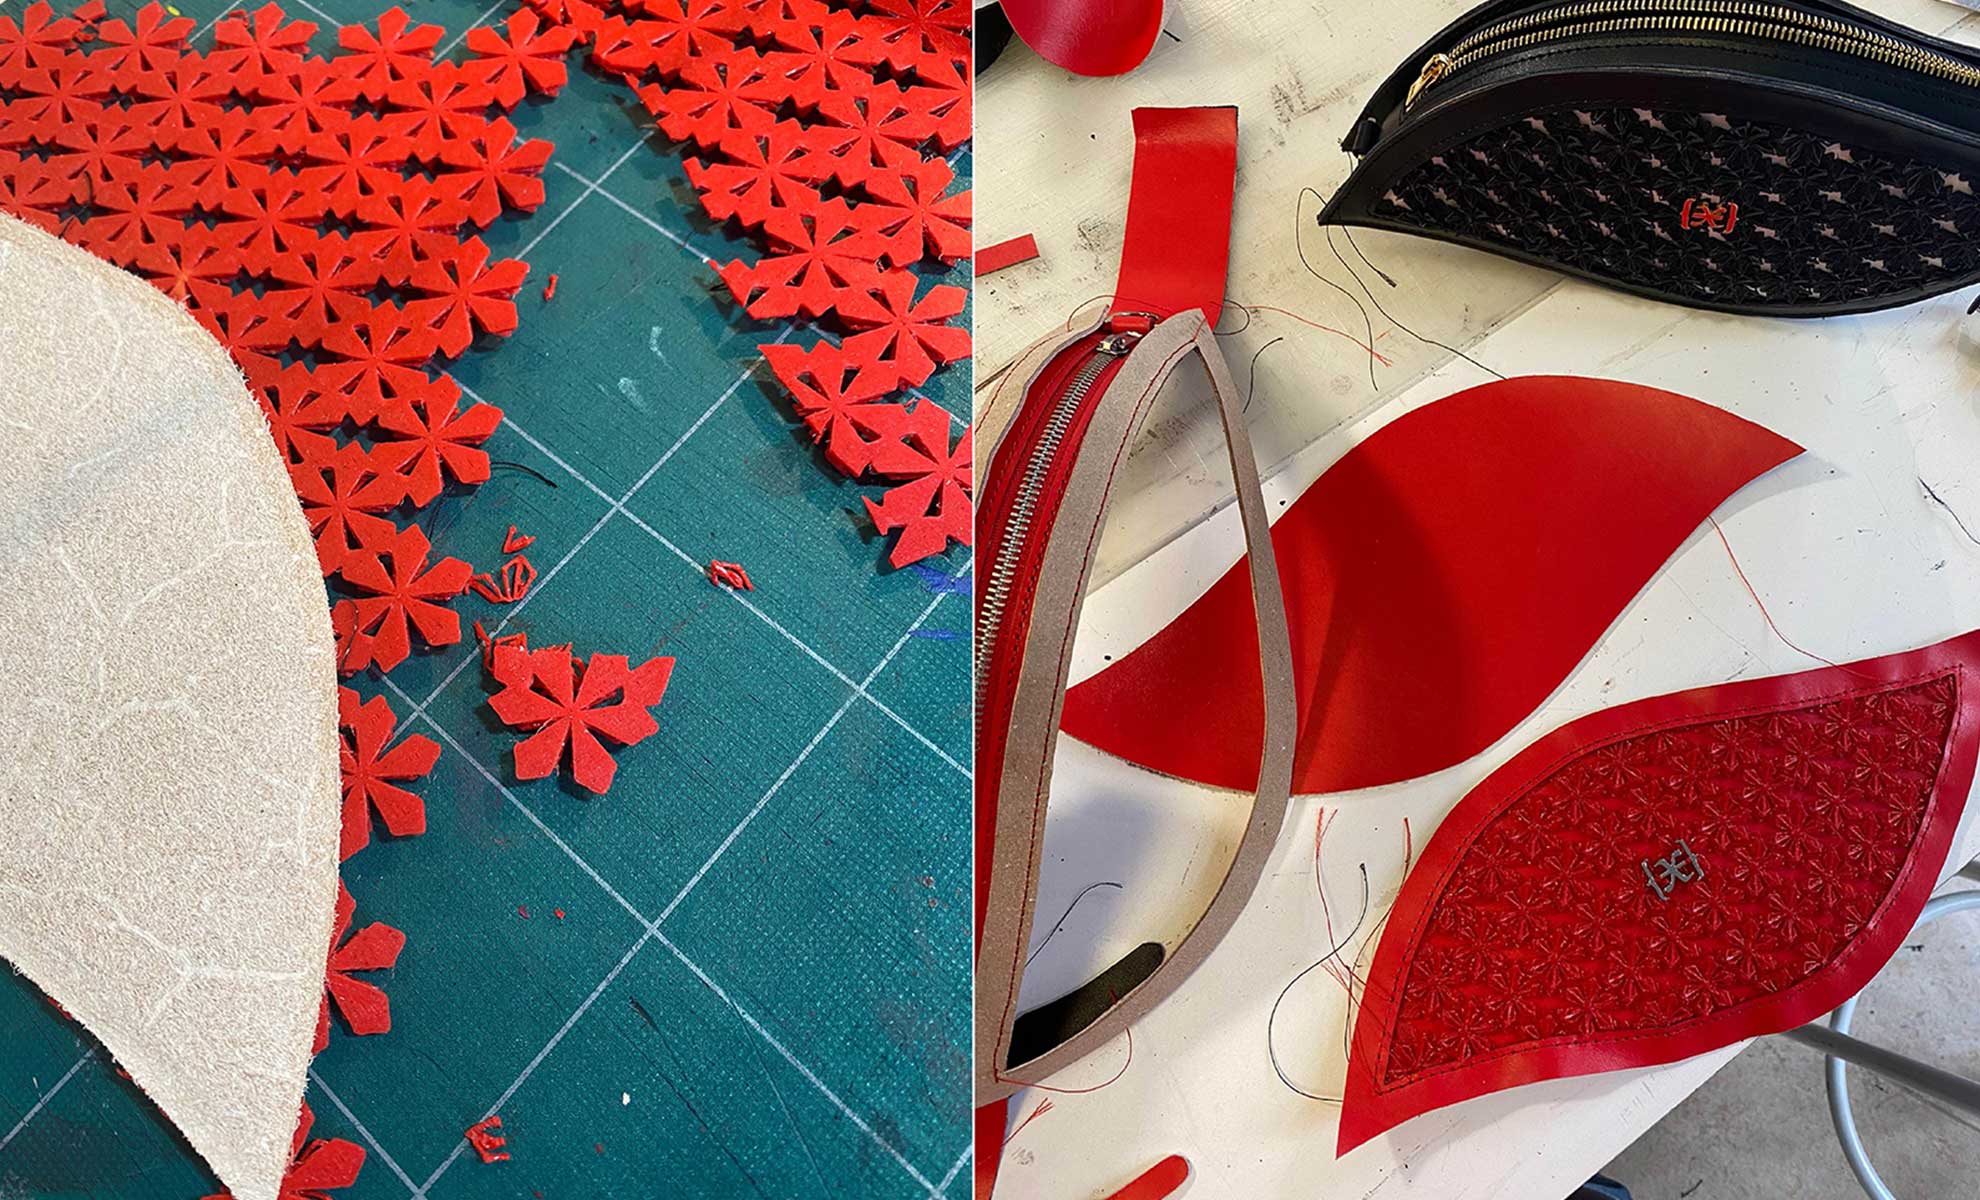 Making of the Galaxy bag in red